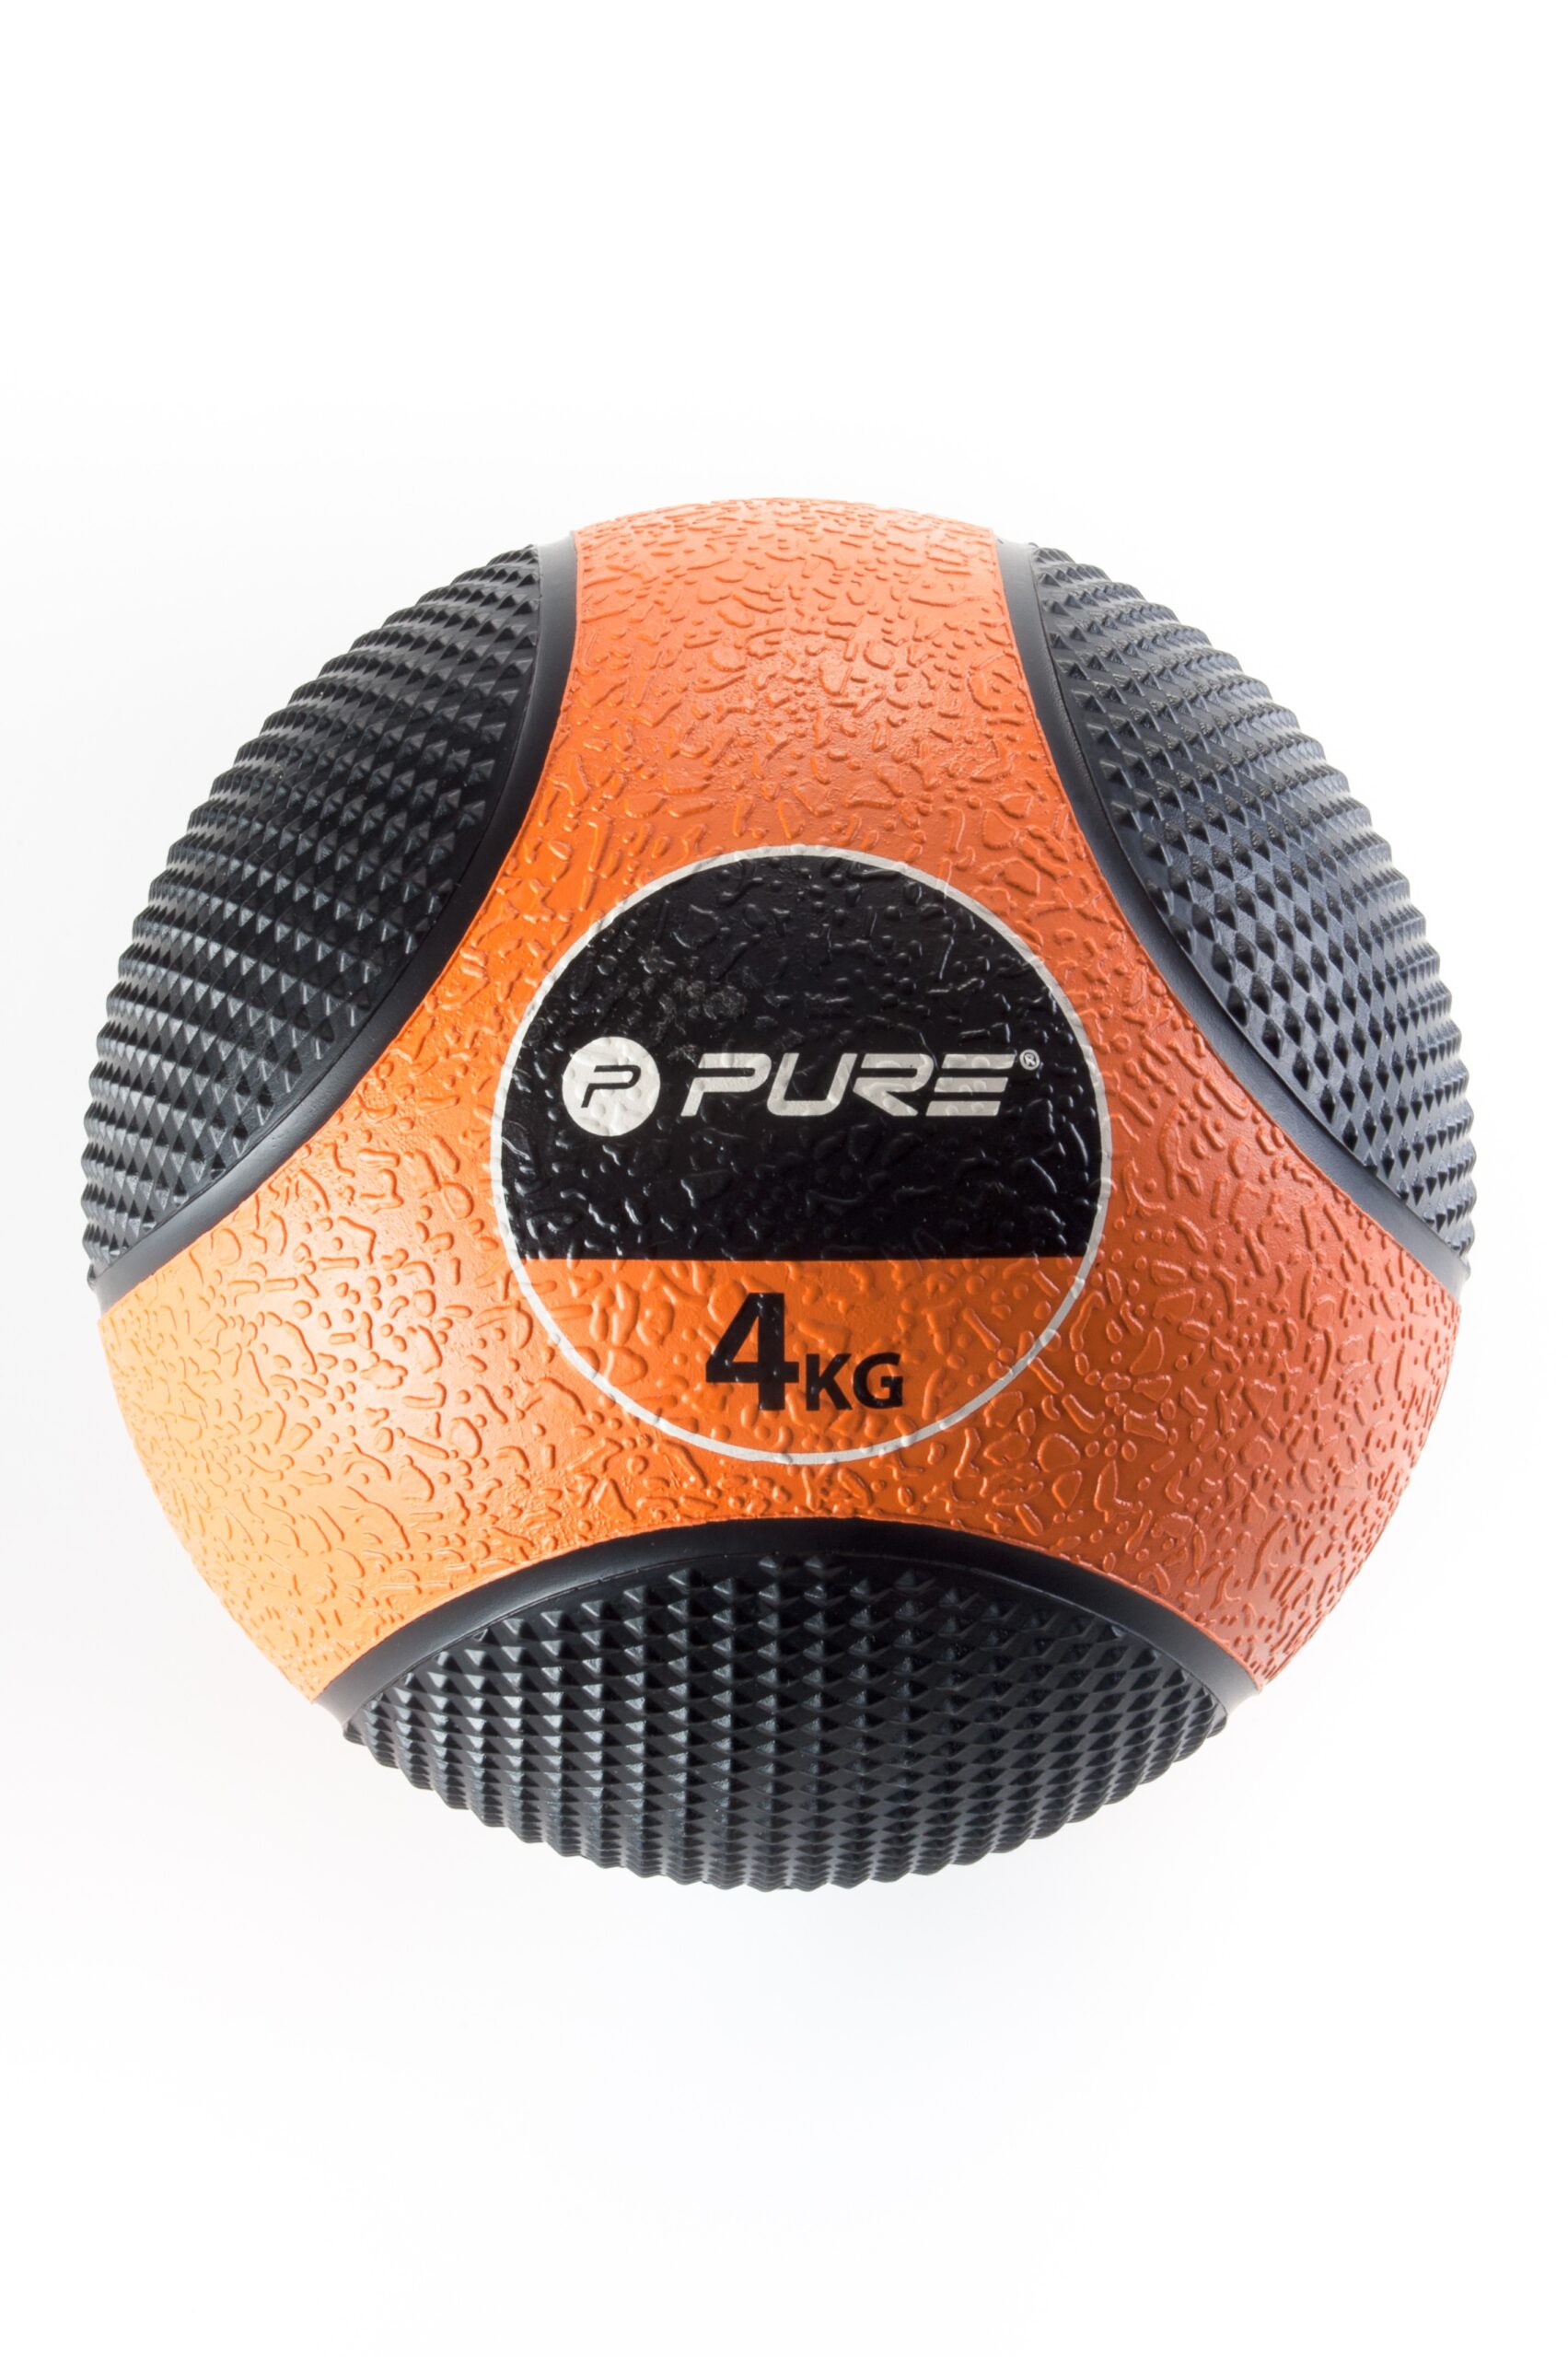 Pure 2Improve Football training tool with ball - Medpoint